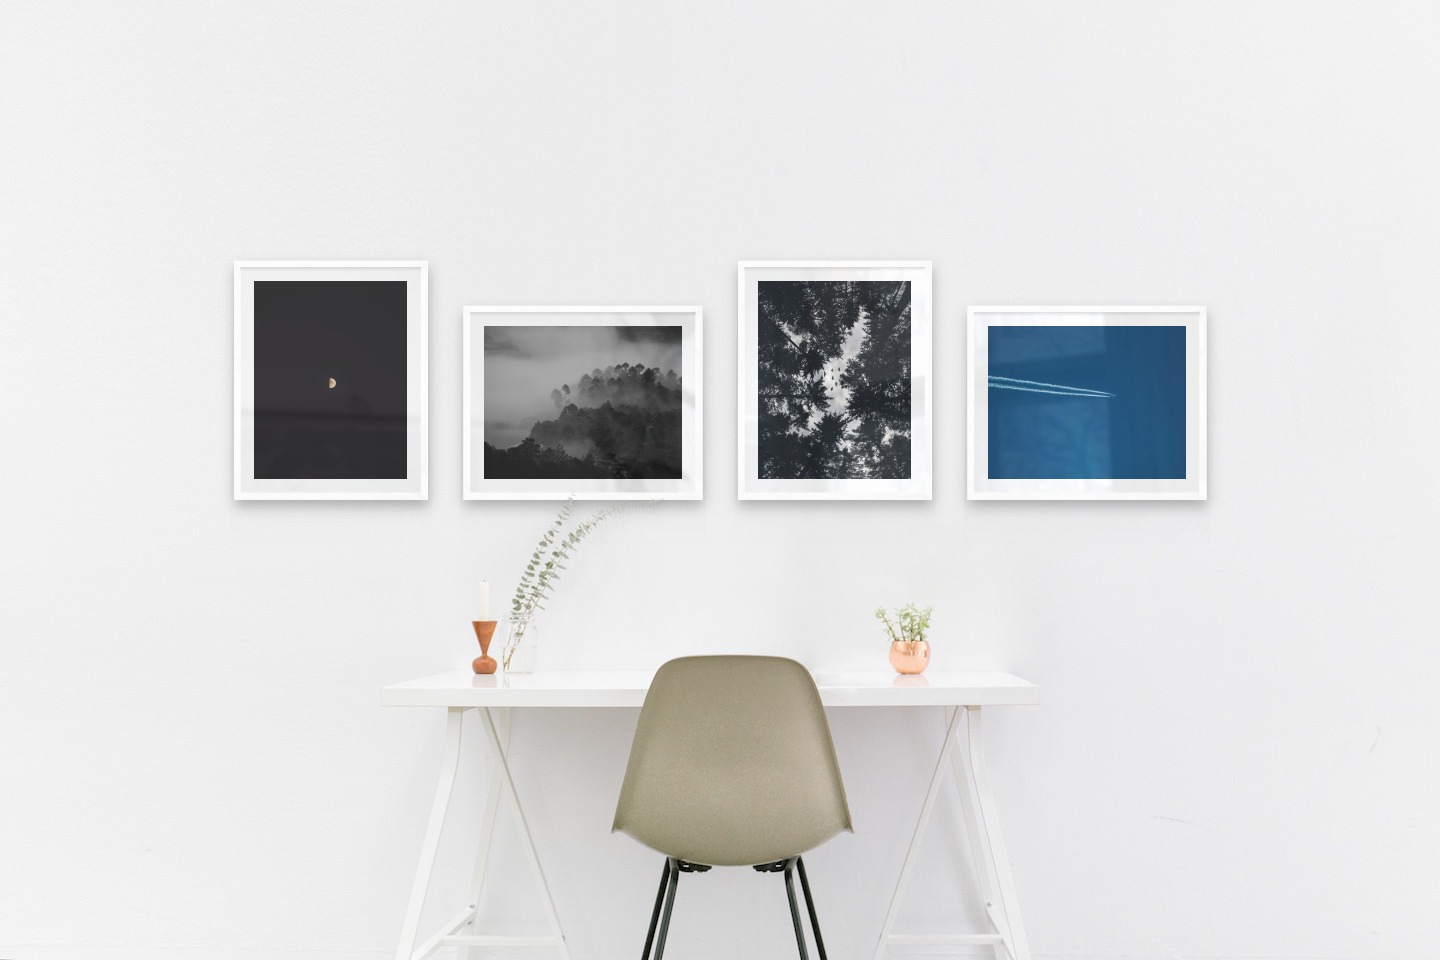 Gallery wall with picture frames in white in sizes 40x50 with prints "The moon", "Foggy wooden tops", "Wooden tops and birds" and "Airplanes in the air"